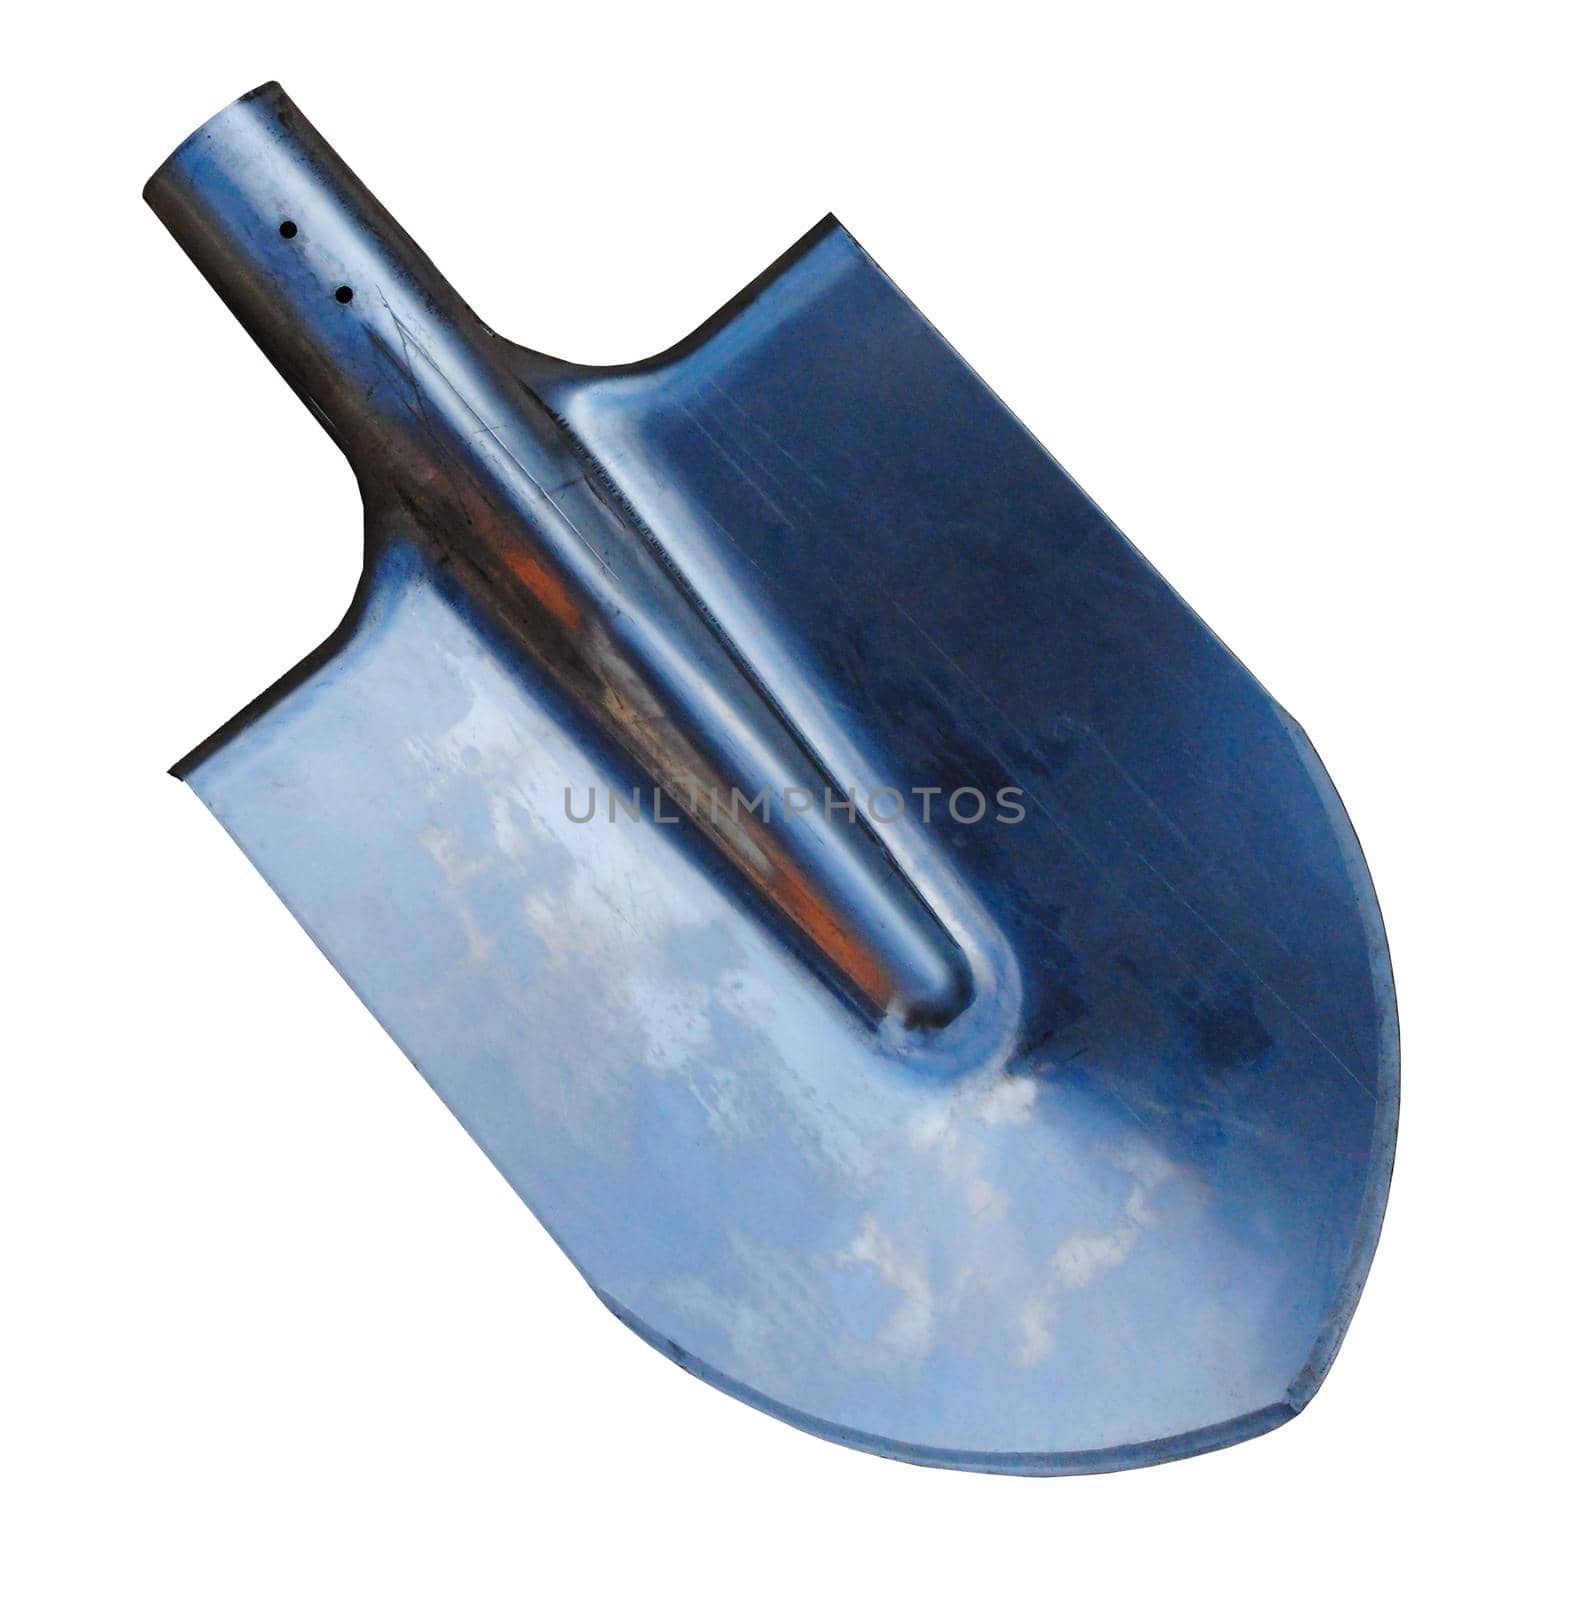 New garden shovel. Shovel close-up isolated on a white background. Steel Spade by mtx